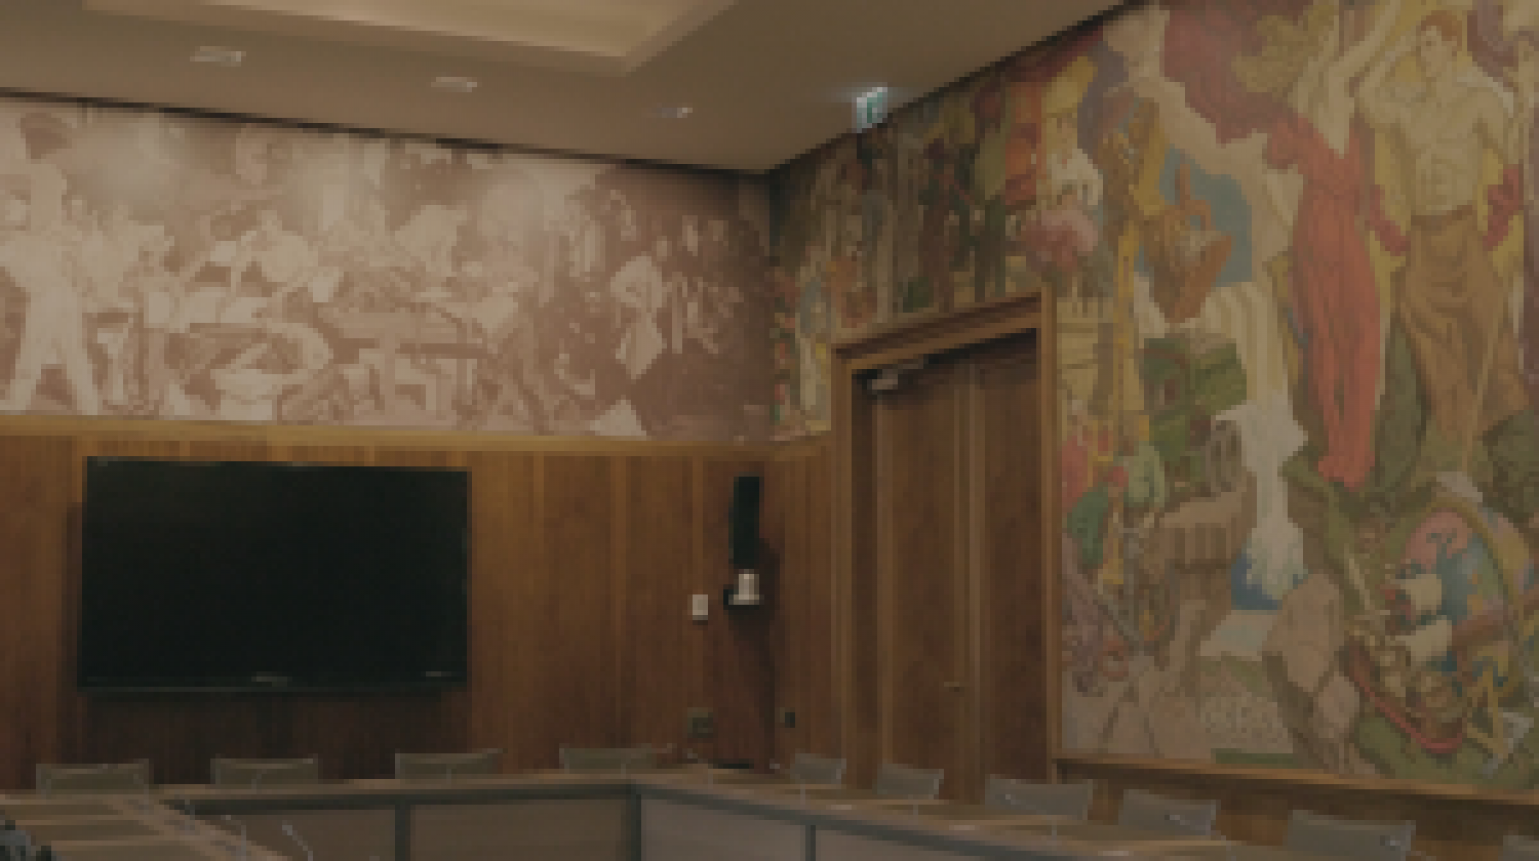 Still from Ryan S. Jeffery and Quinn Slobodian, The Walls of the WTO (2018)